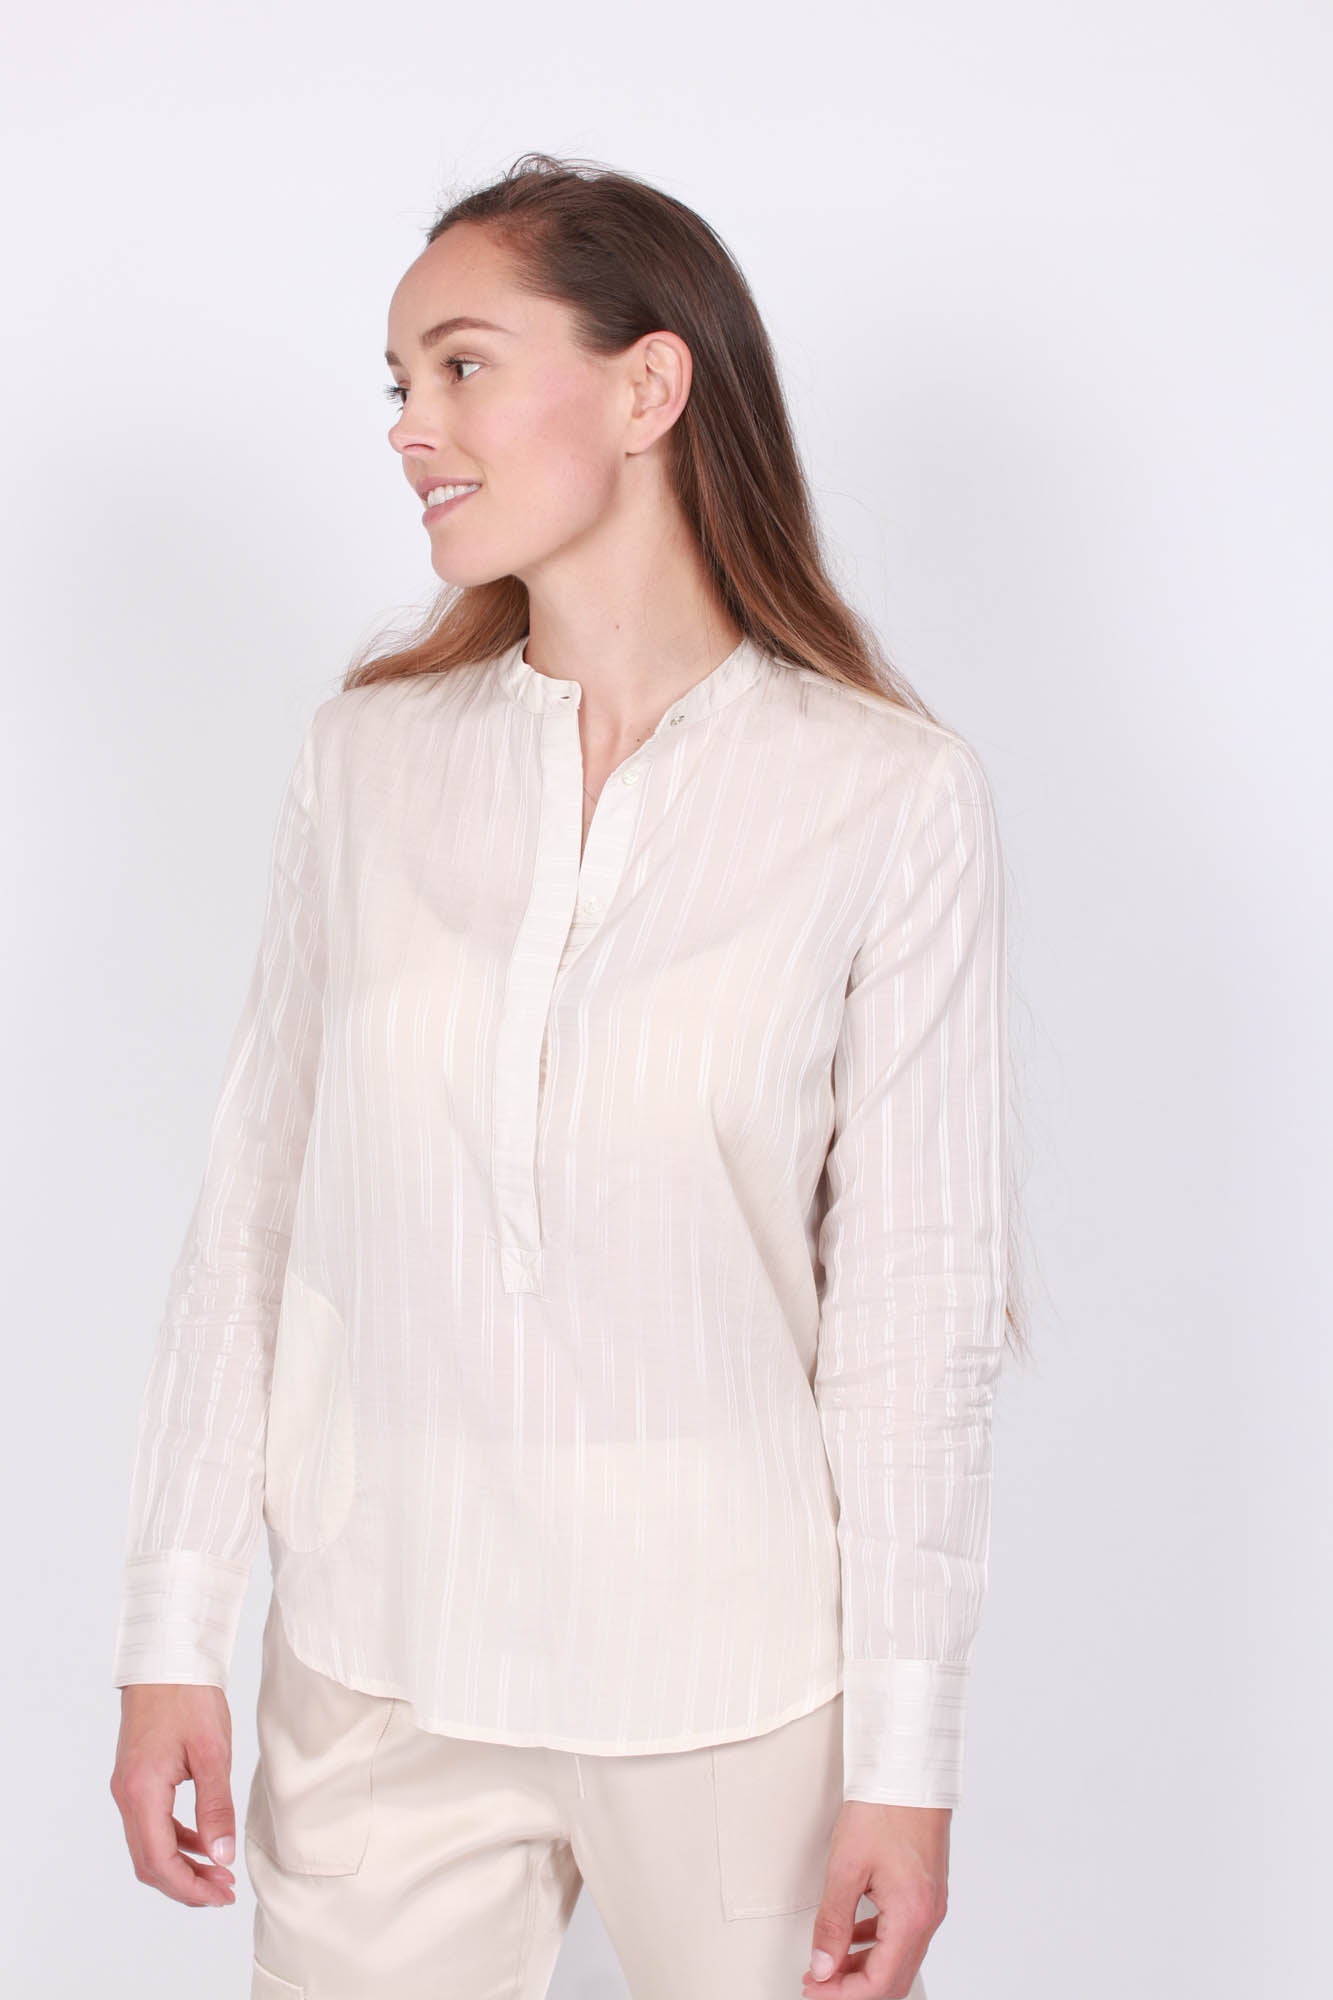 DAY Witty Bluse - Ivory Shade - DAY - Bluser & Skjorter - VILLOID.no